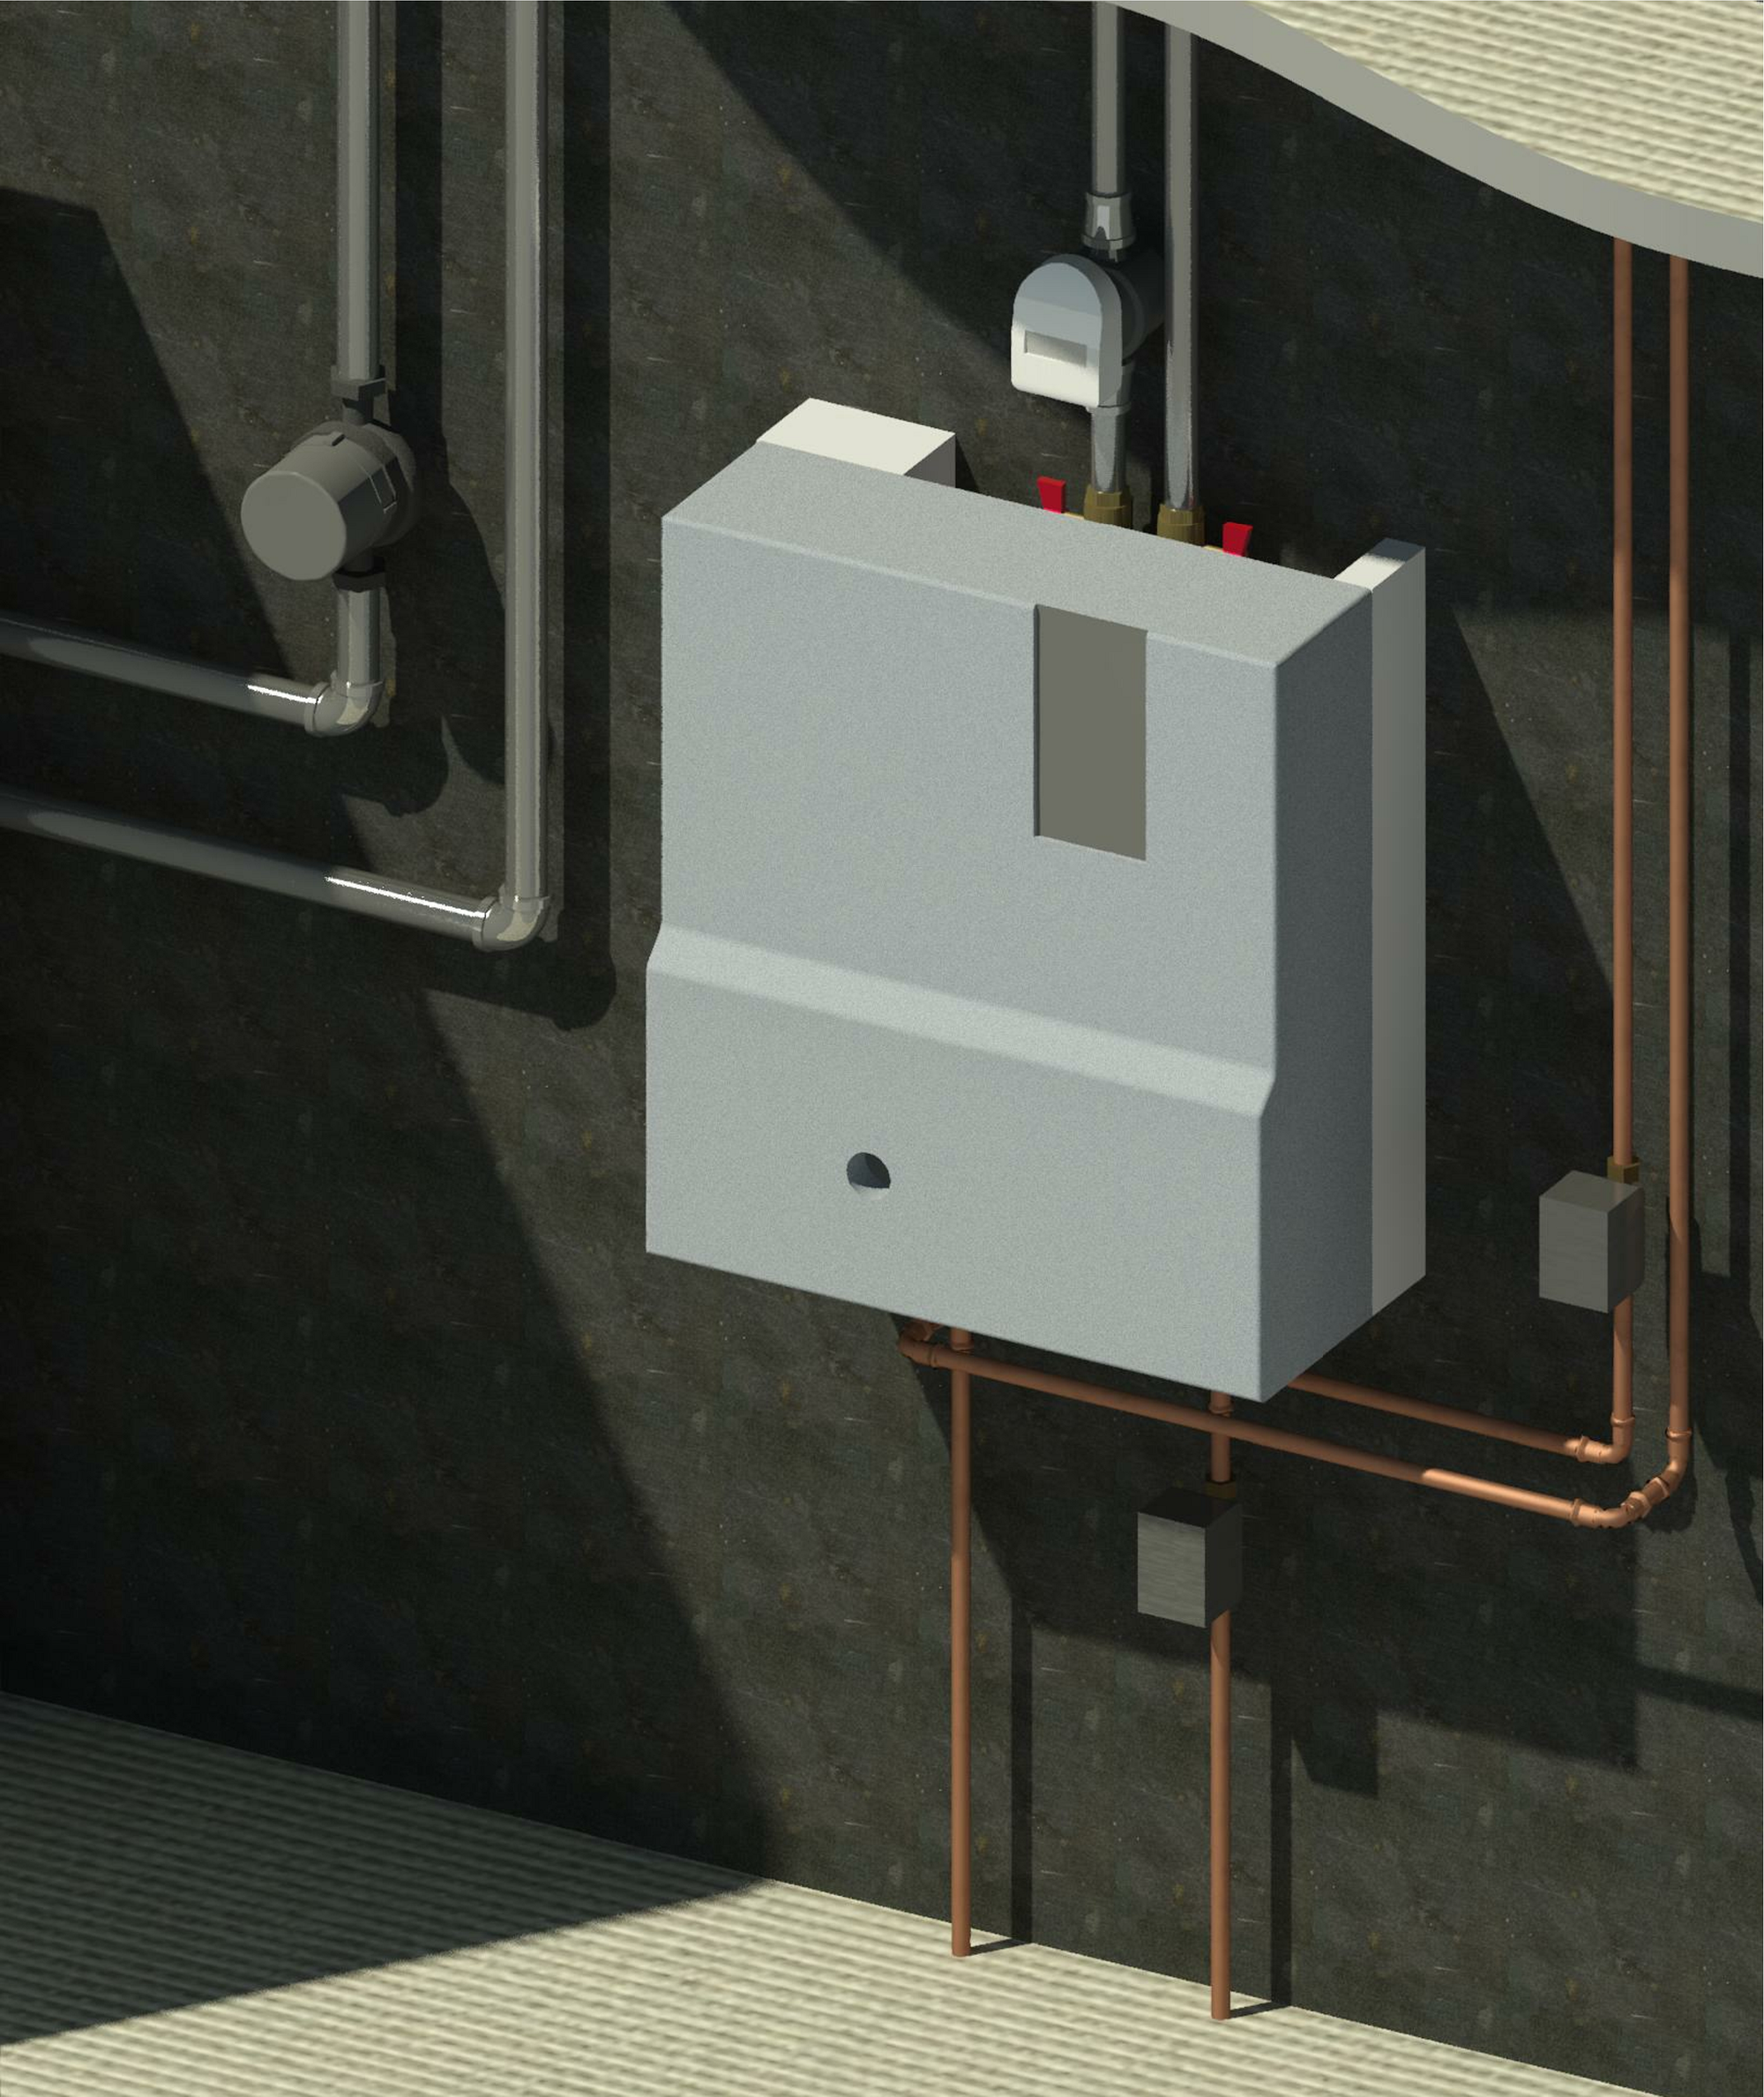 Rendering showing HIU with heat meter and zone valves.